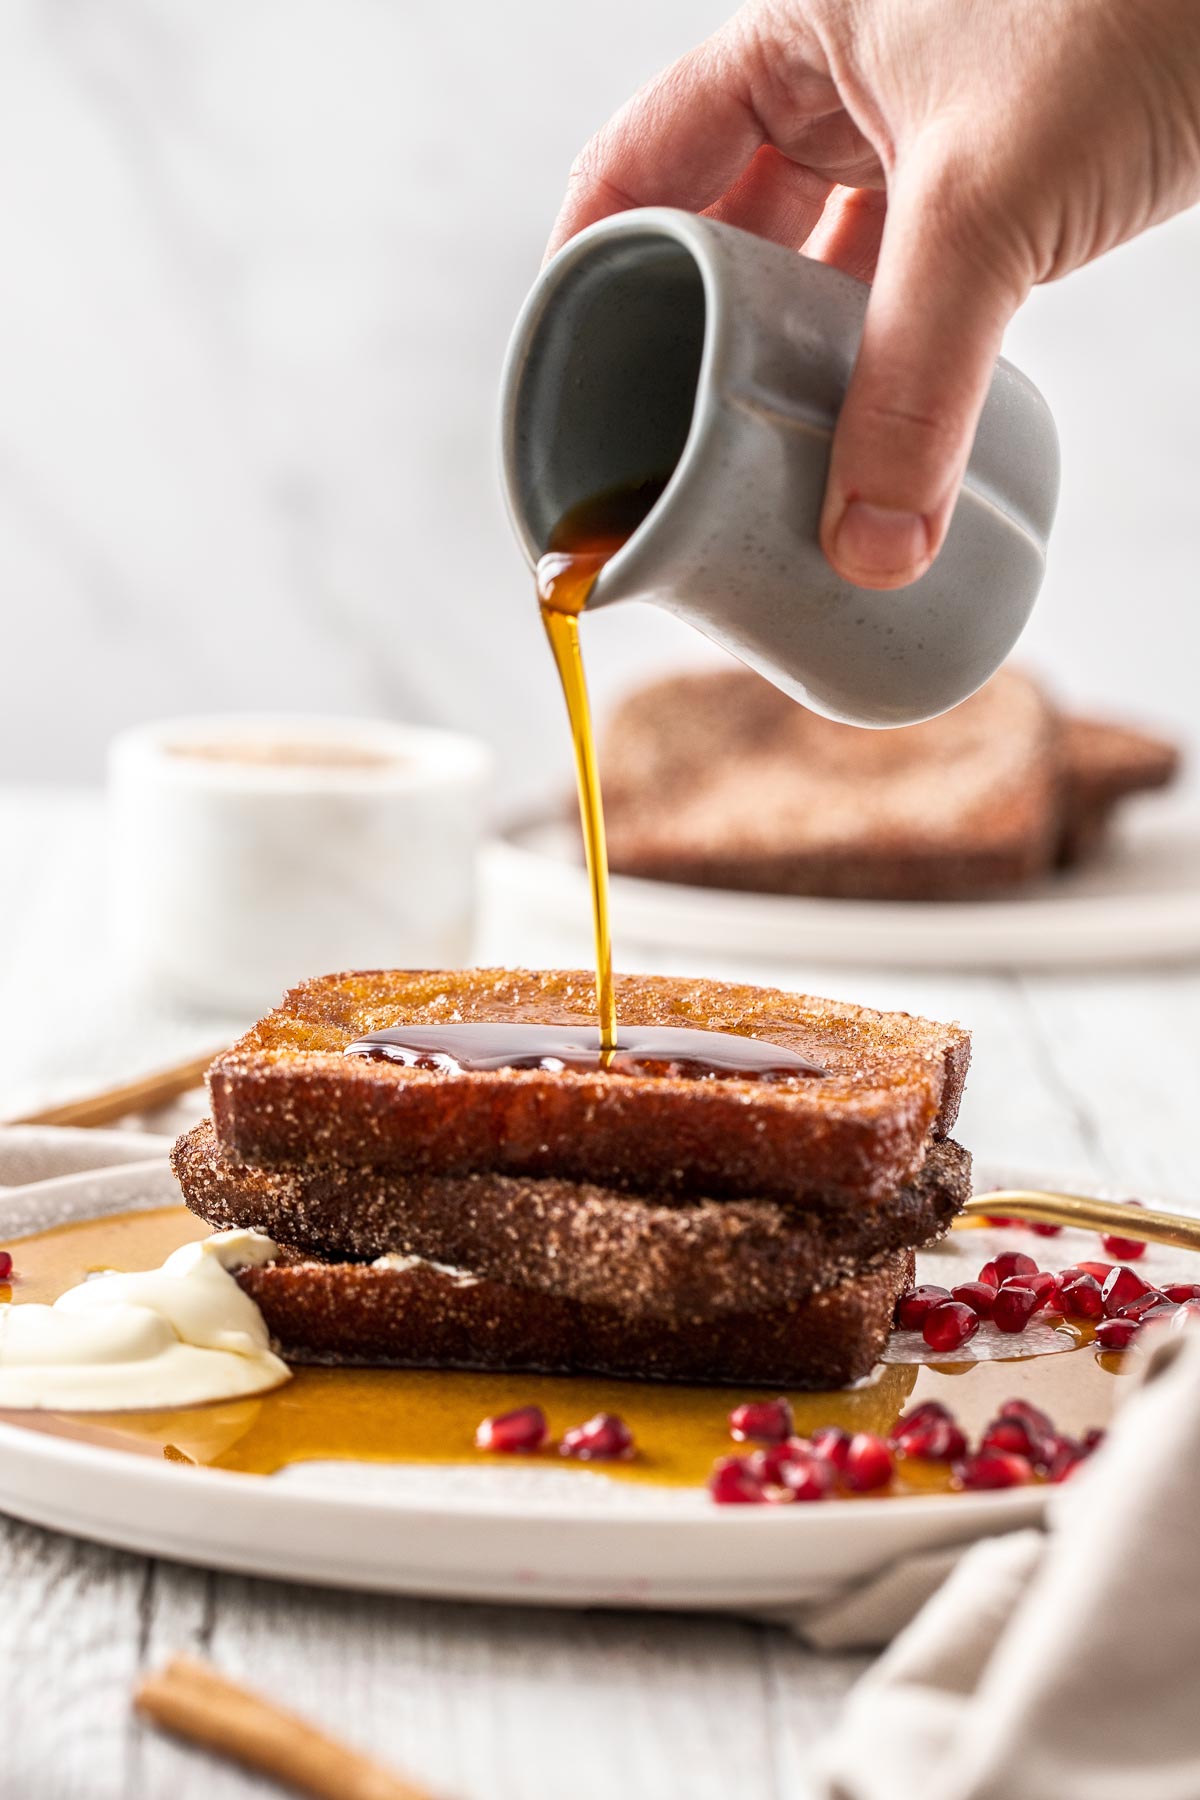 Maple syrup being poured on to a stack of Cinnamon Sugar French Toast.